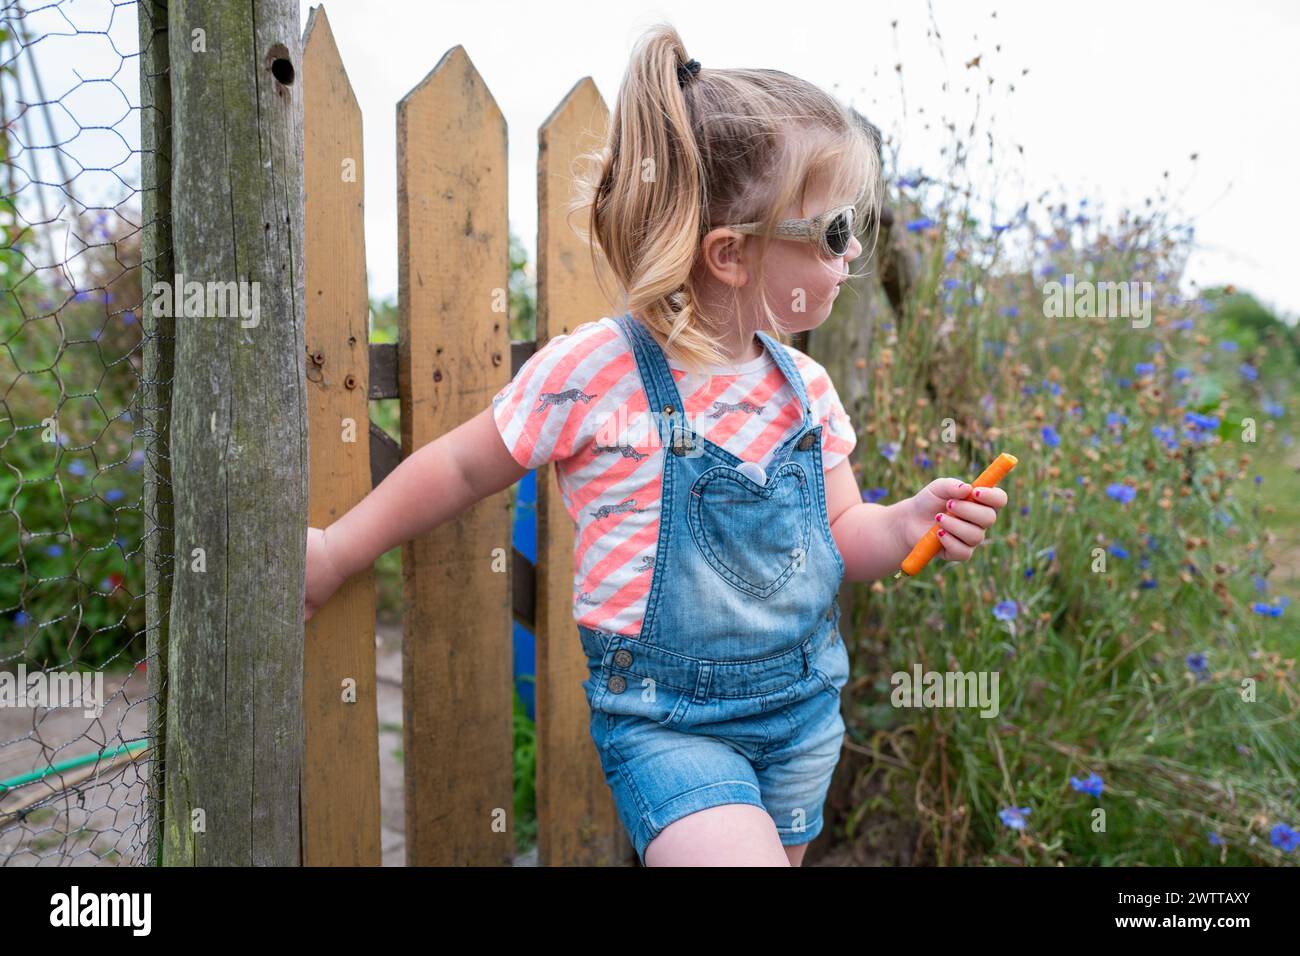 Little girl enjoying a nature trail, peering through a wooden fence Stock Photo